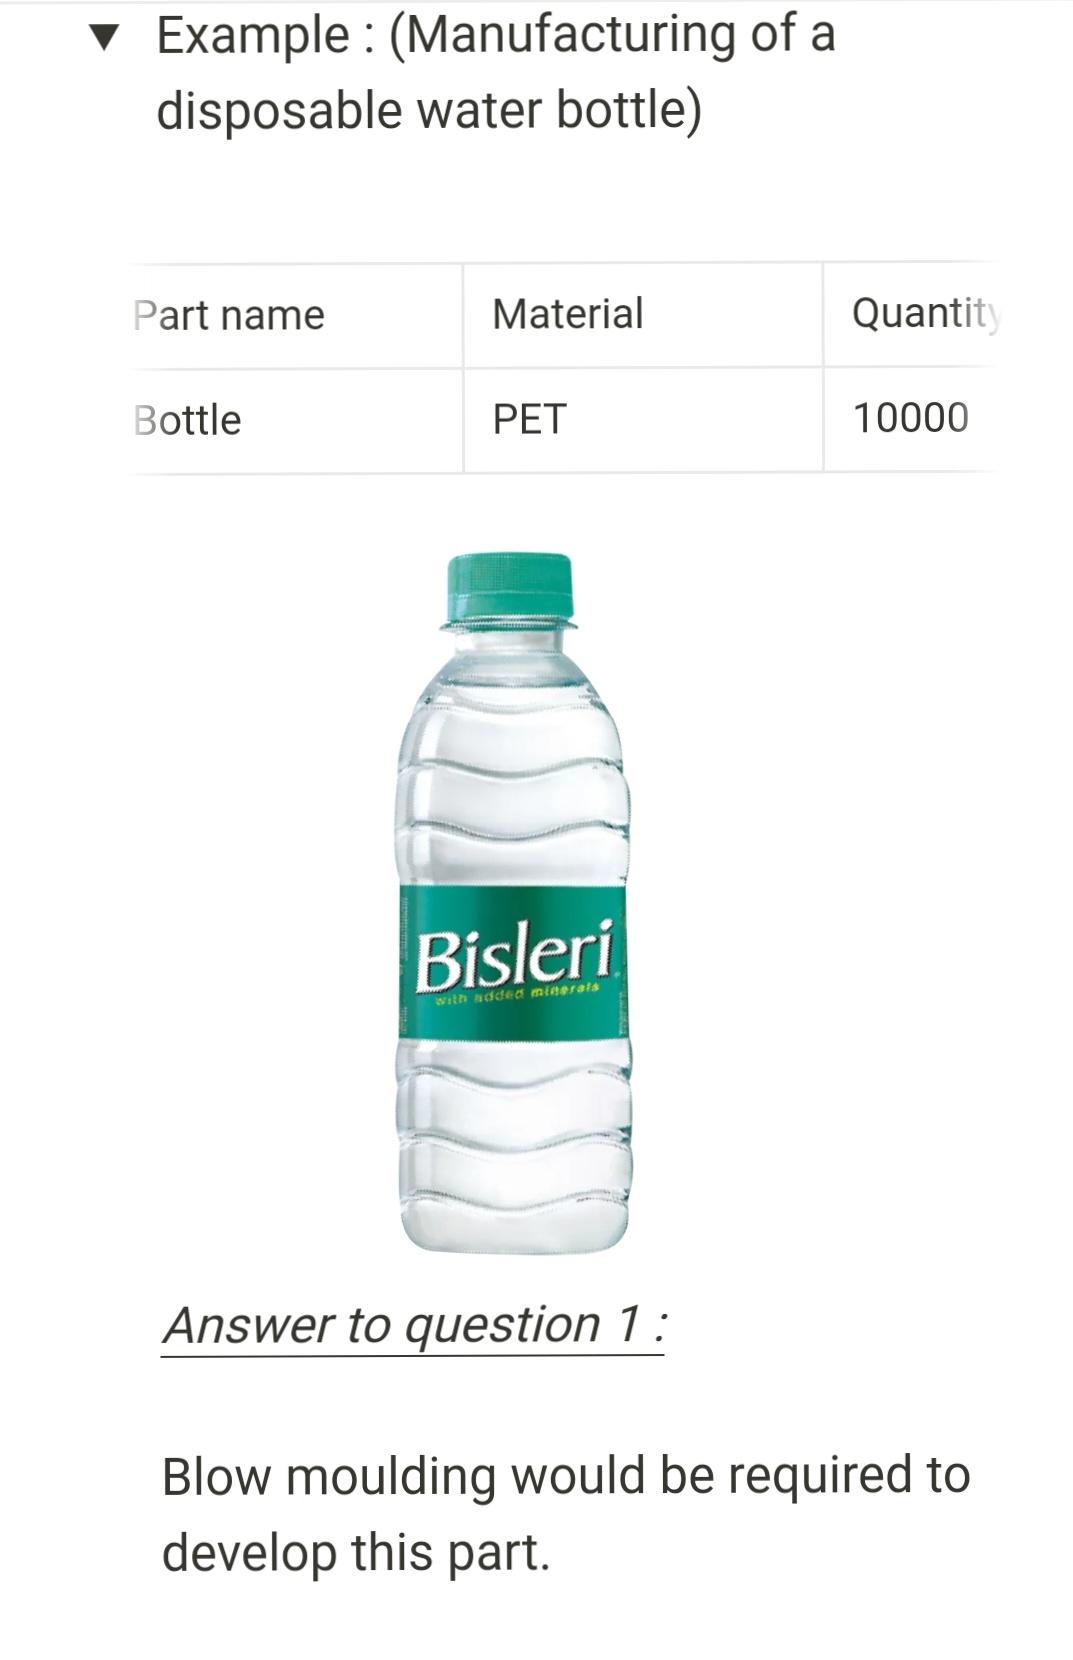 Example: (Manufacturing of a disposable water bottle) Part name Bottle Material PET Bisleri with added